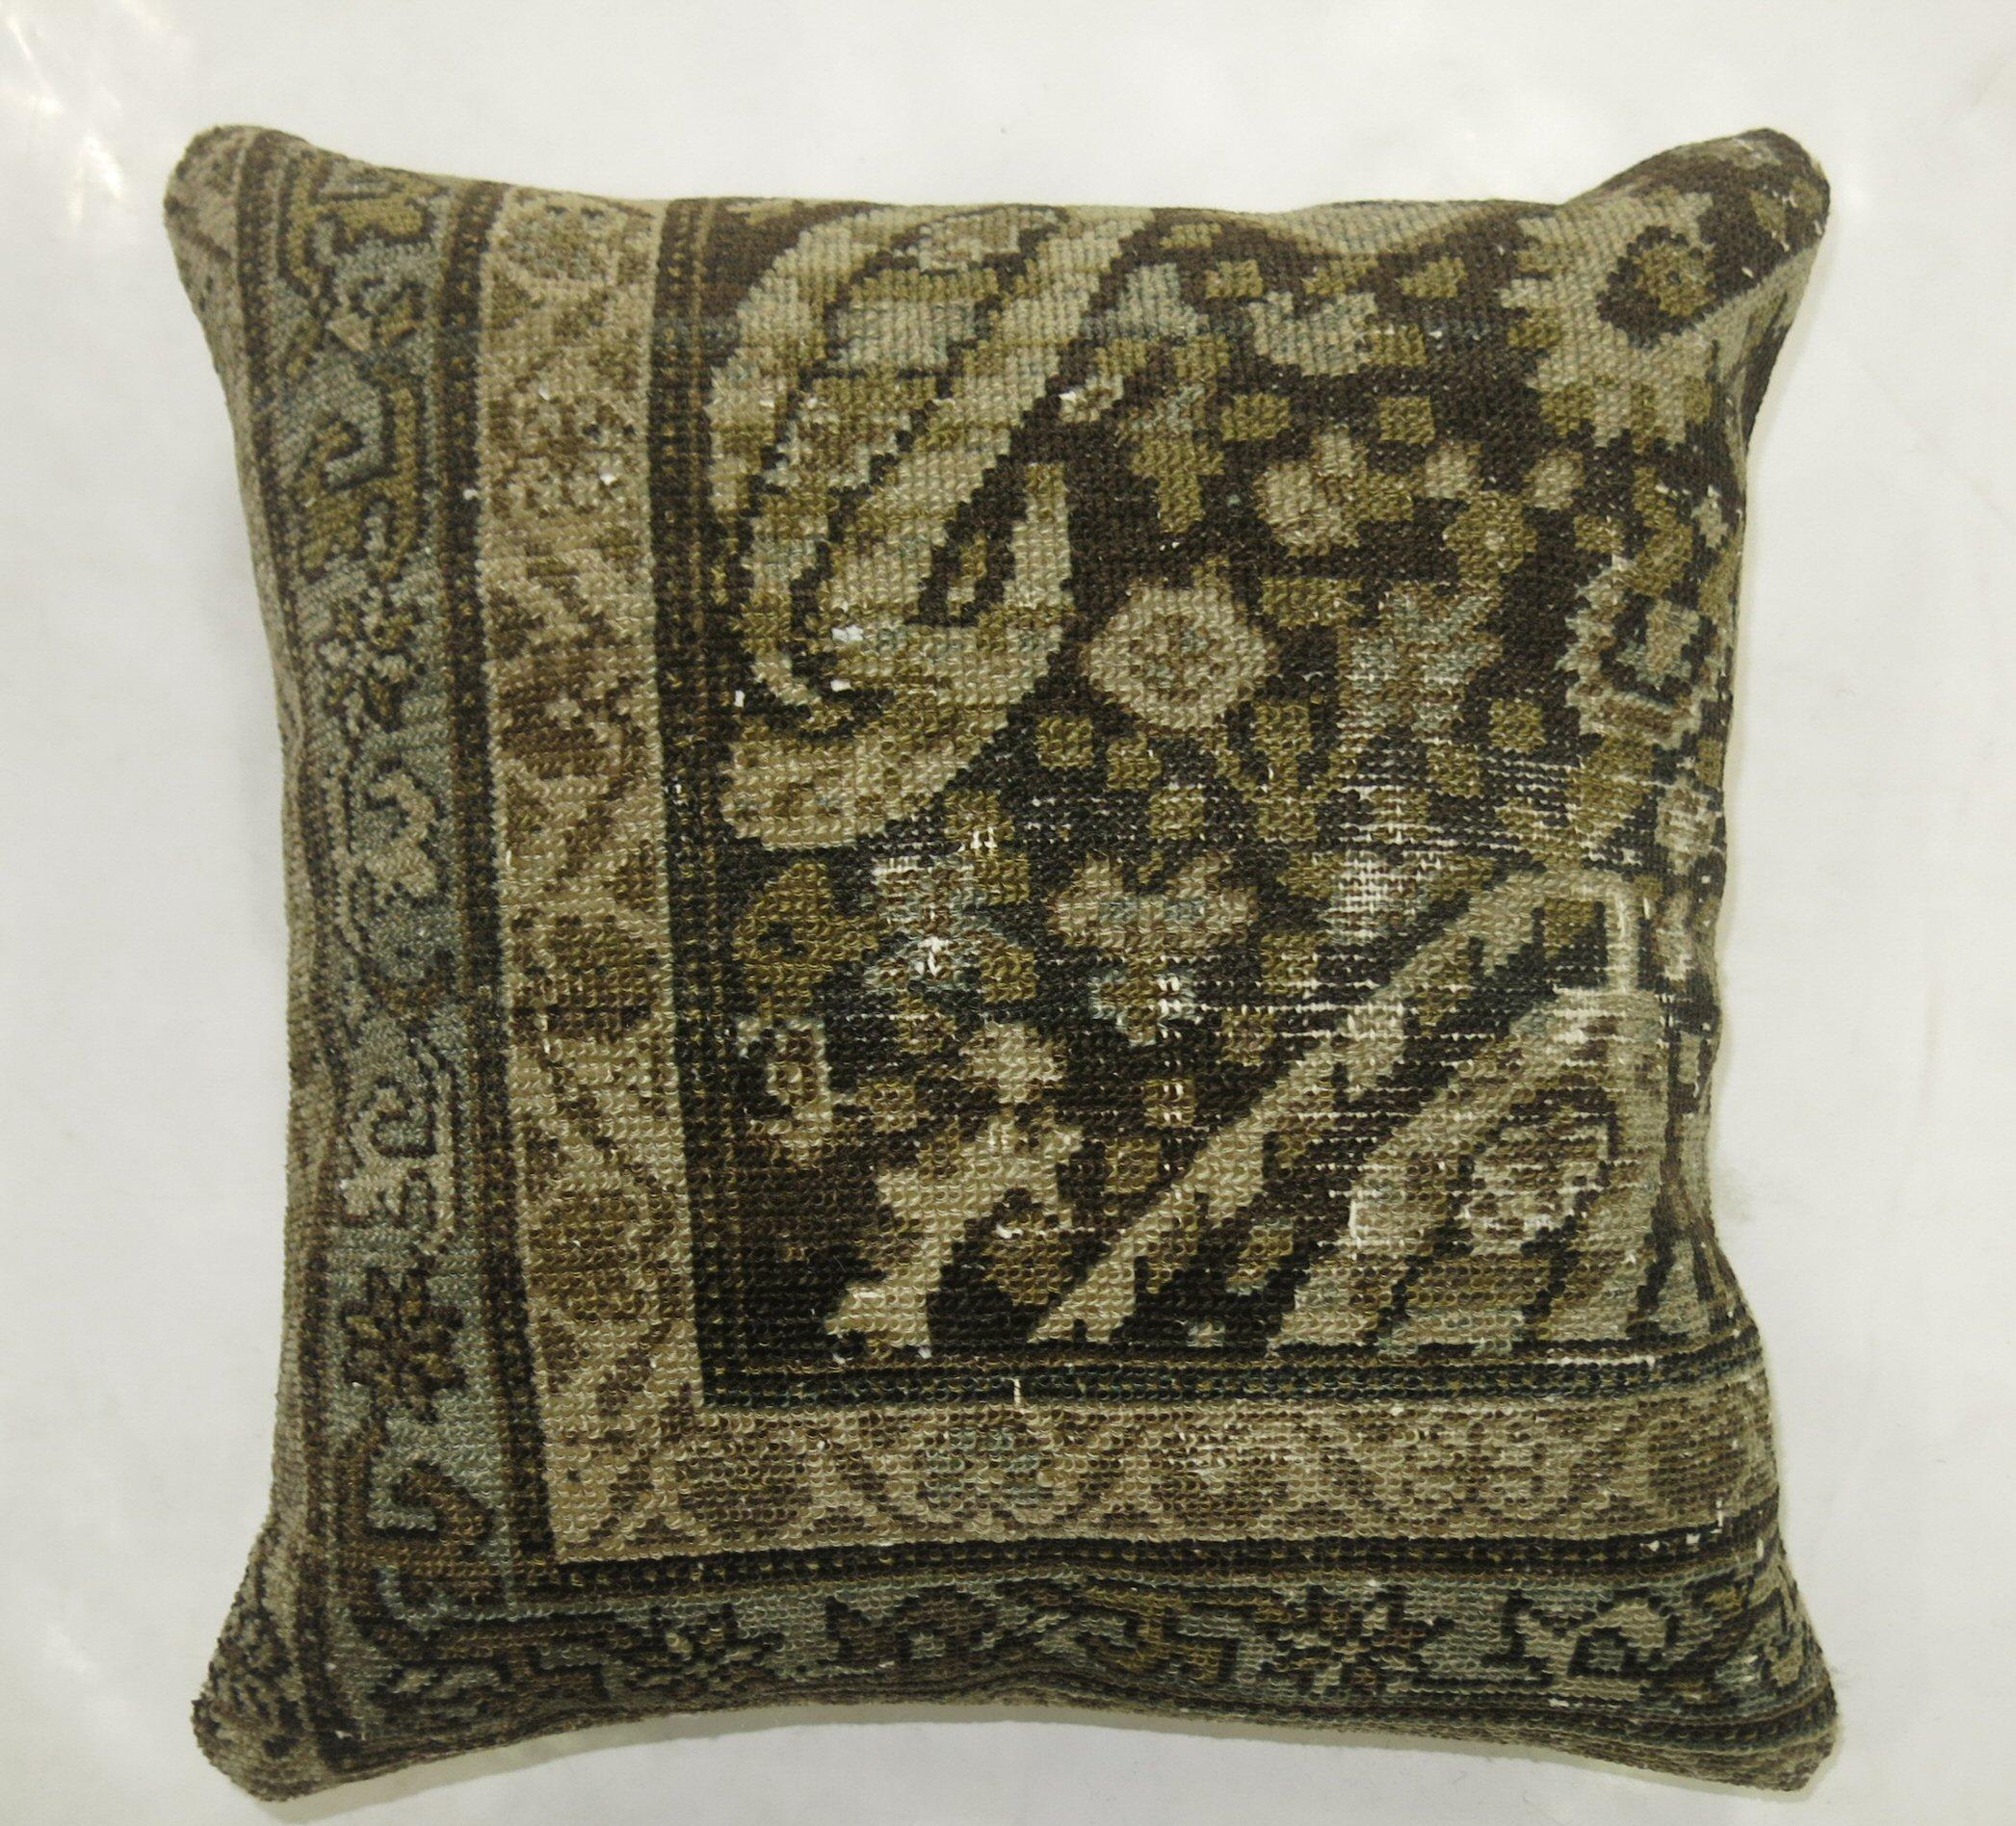 Pillow made from a vintage Persian Malayer rug.

Measures: 16'' x 16''.